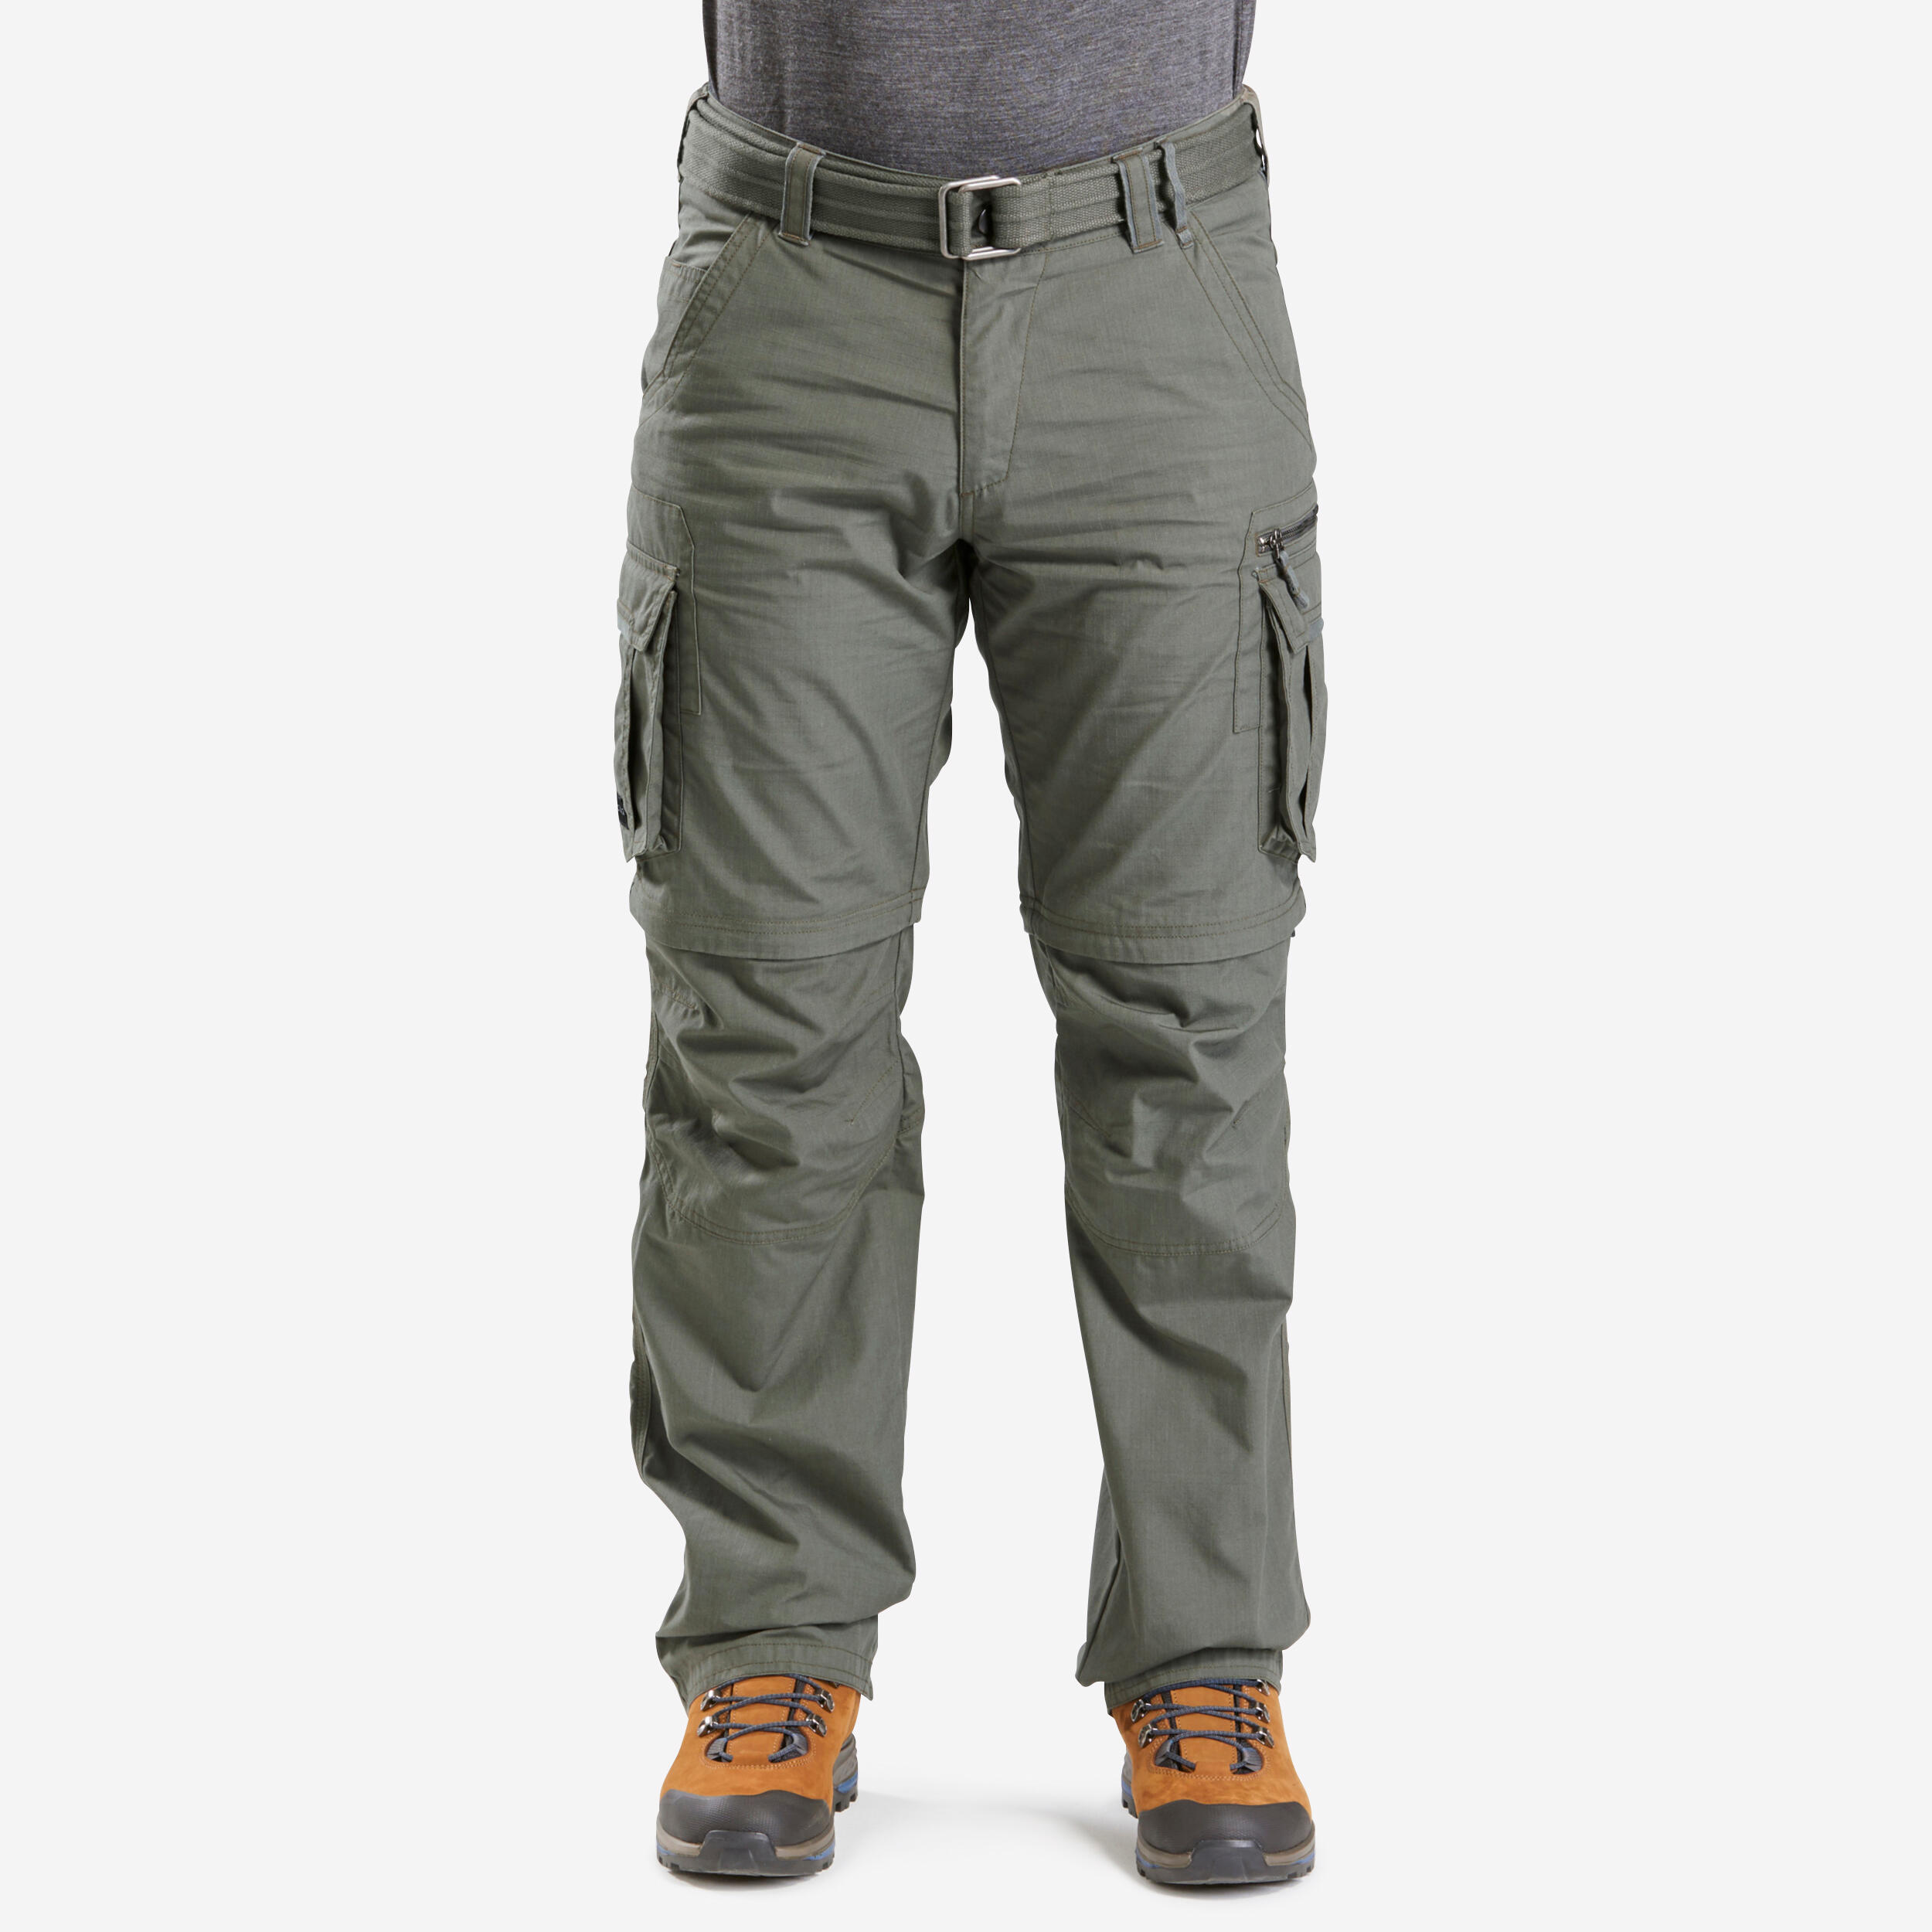 Mens Tactical Trousers Zip off Convertible Military Cargo Pants Hiking  Combat Work Pants (Color : Green, Size : XL) (Green S) : Buy Online at Best  Price in KSA - Souq is